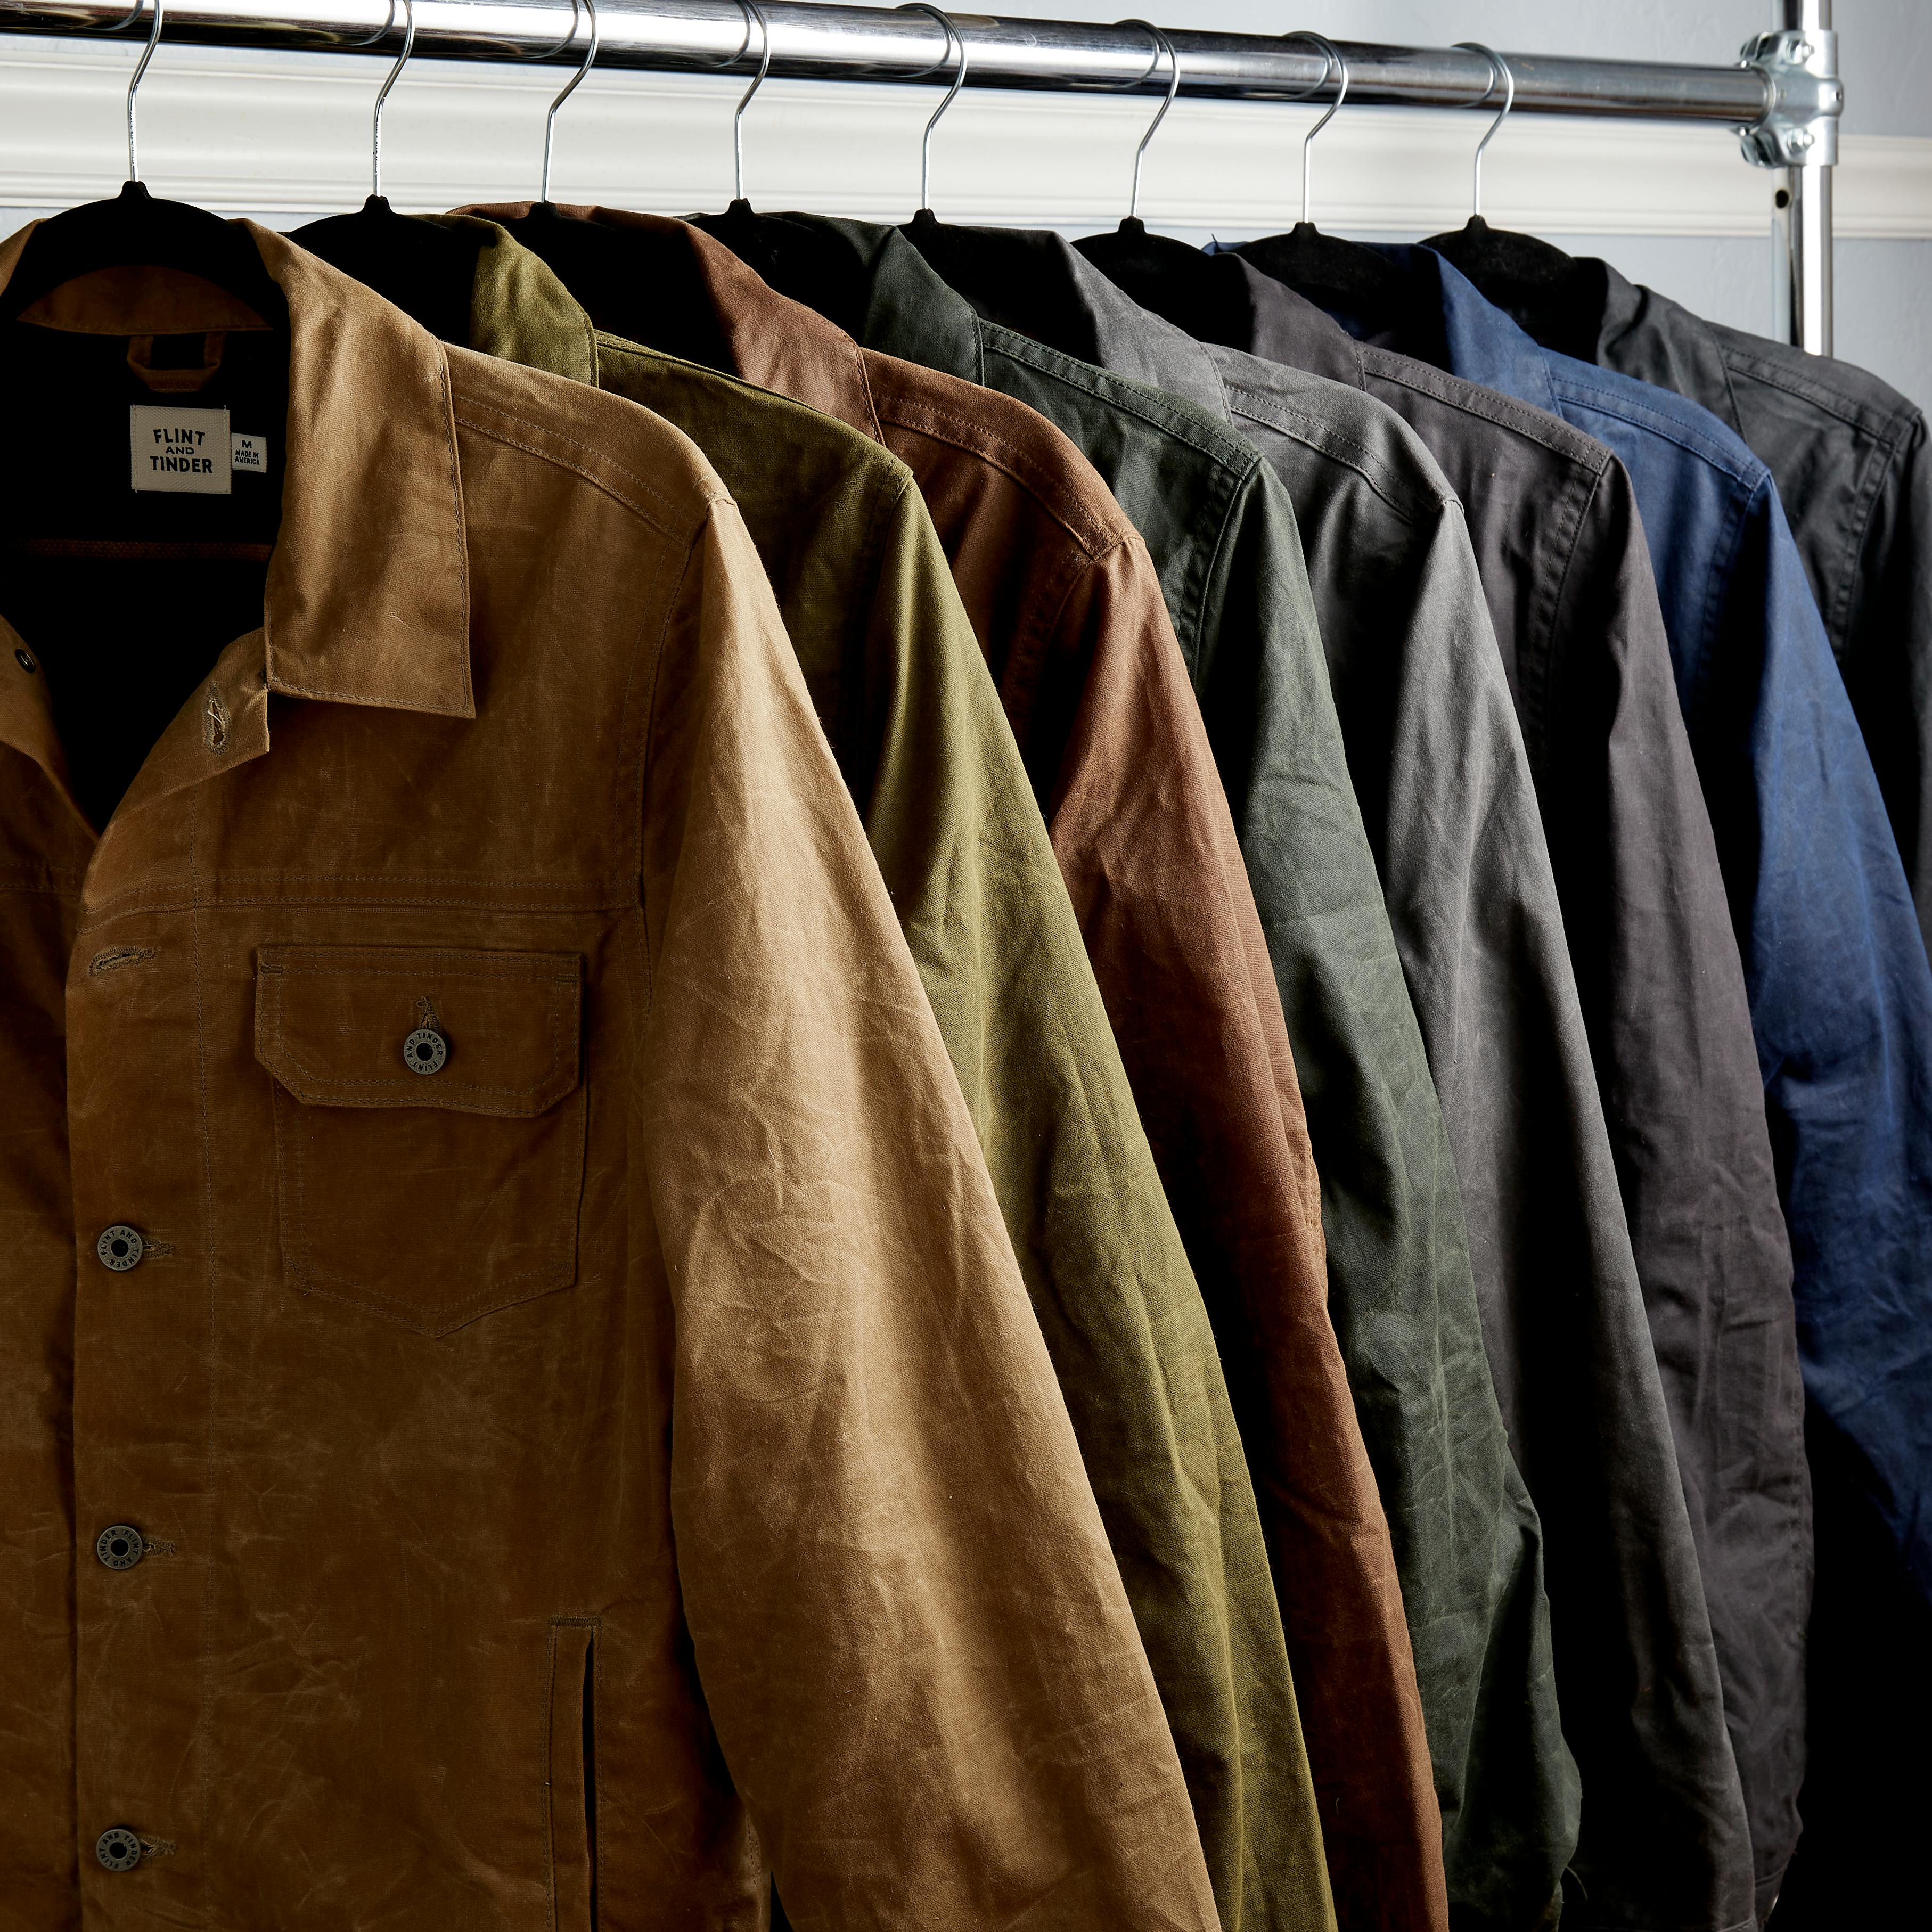 Livid - Fred canvas jacket. Waxed with otterwax. Available in august.